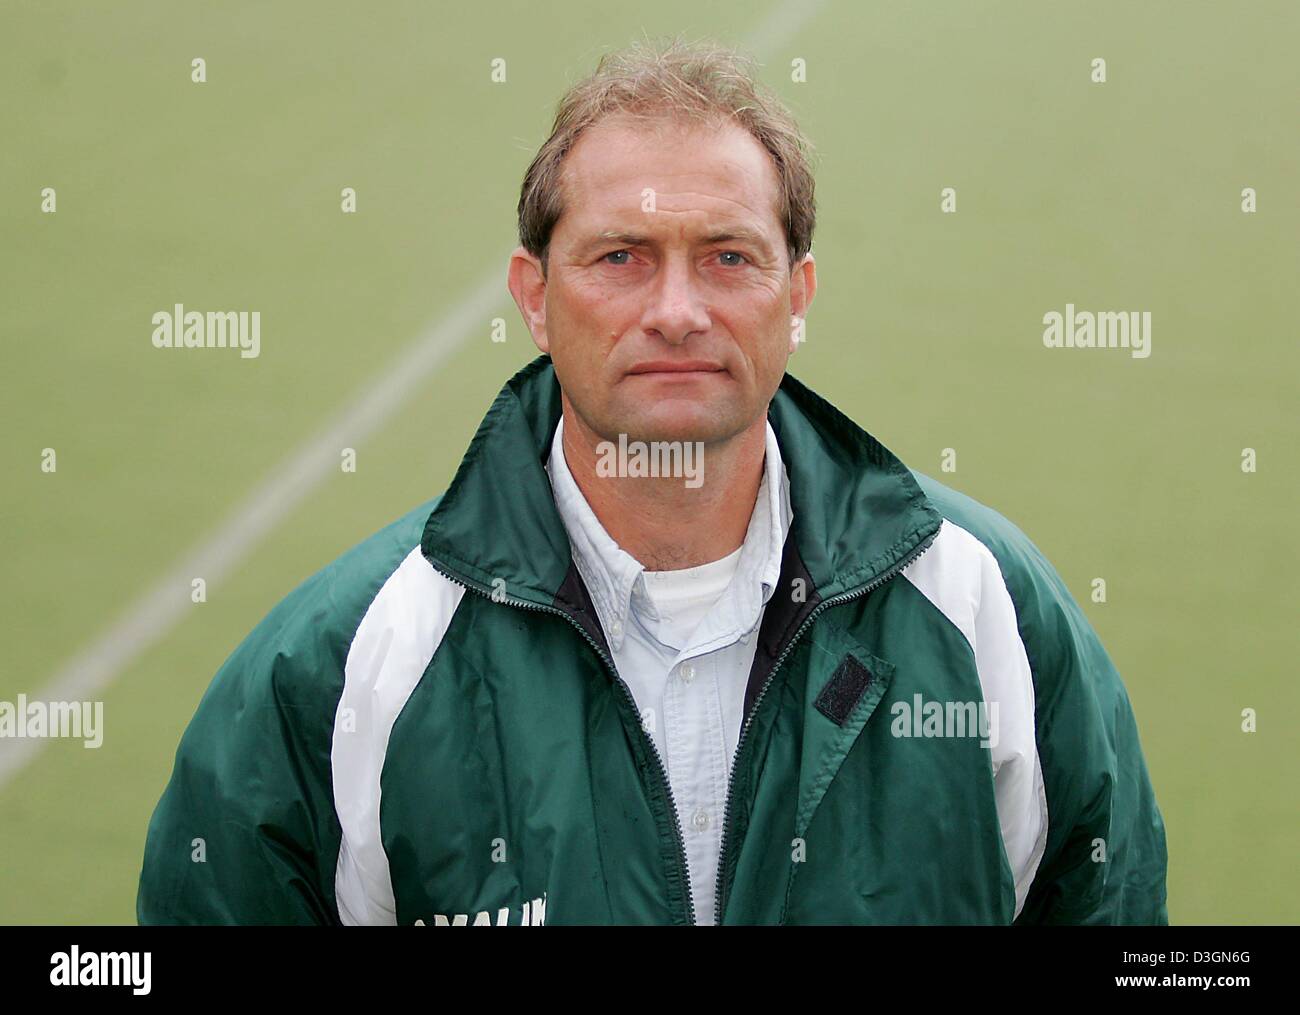 (dpa) - Dutch born Roelant Oltmans, head coach of the Pakistan national field hockey team, in a picture taken before the start of a game against Germany in Berlin, 13 June 2004. Pakistan lost 1-3. Stock Photo